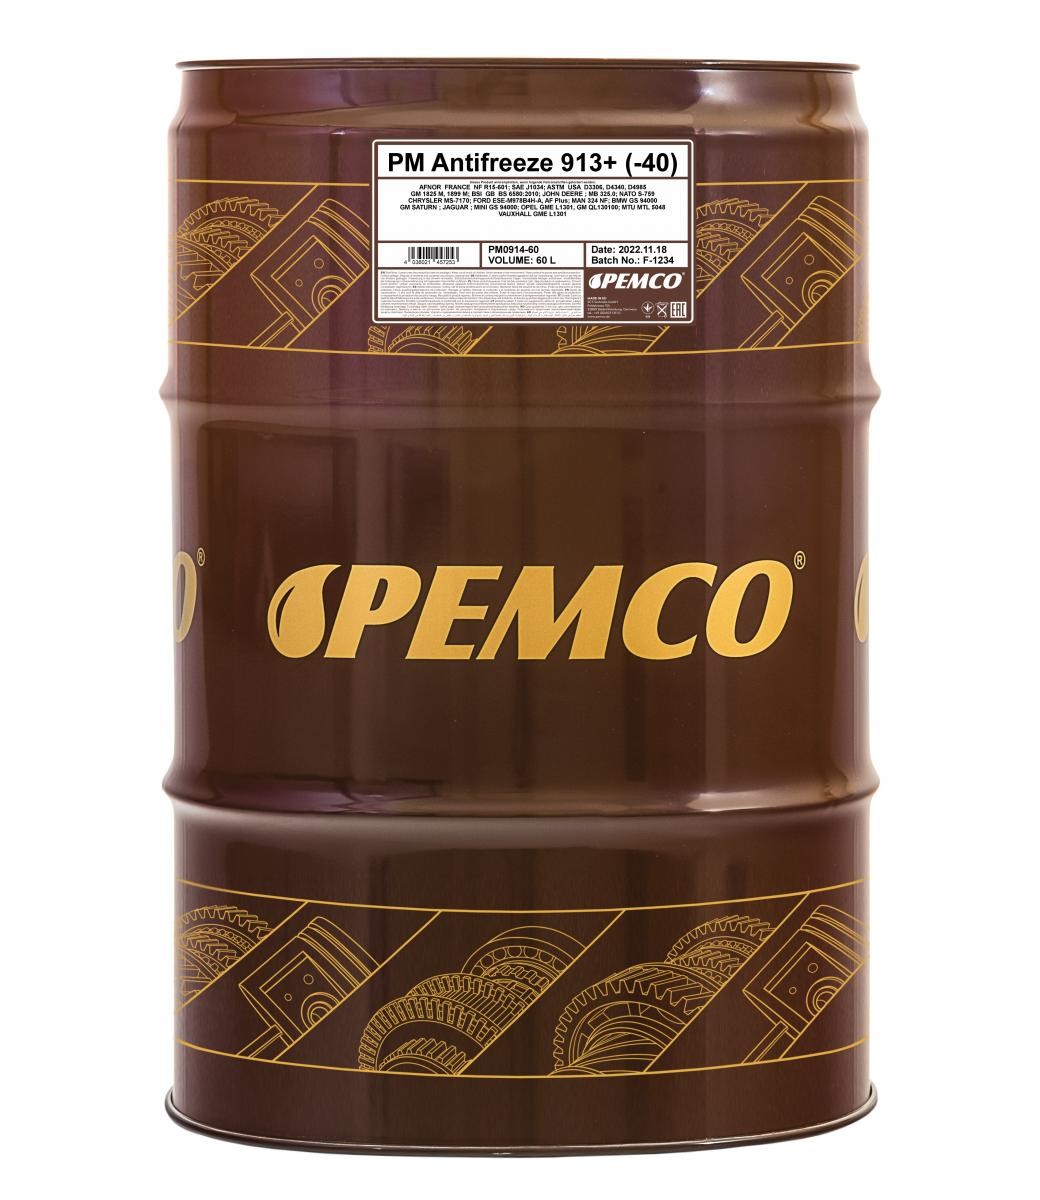 PEMCO Antifreeze 913+, -40 G13 yellow, 60l G13, Temperature range from: -40°C Coolant PM0914-60 buy